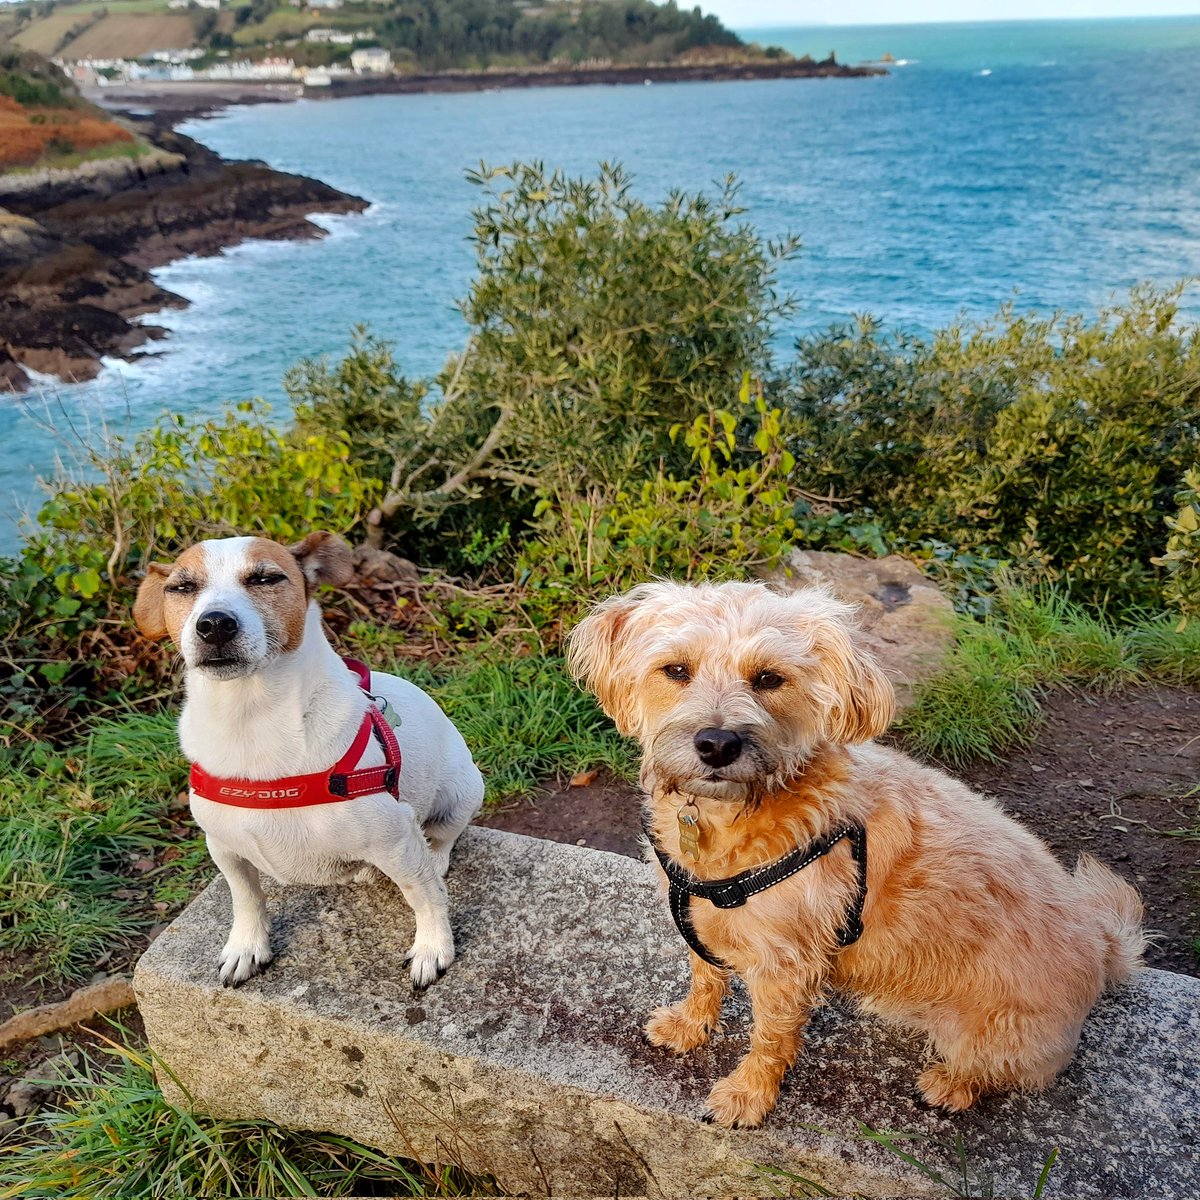 Double trouble on the cliffpaths today 😂😂 grand day for it. @MiloShropshire @VisitJerseyCI @EzyDogUK @TheOnlyGuru hope your all doing well. #terriers #thursdayvibes #NoBonesDay